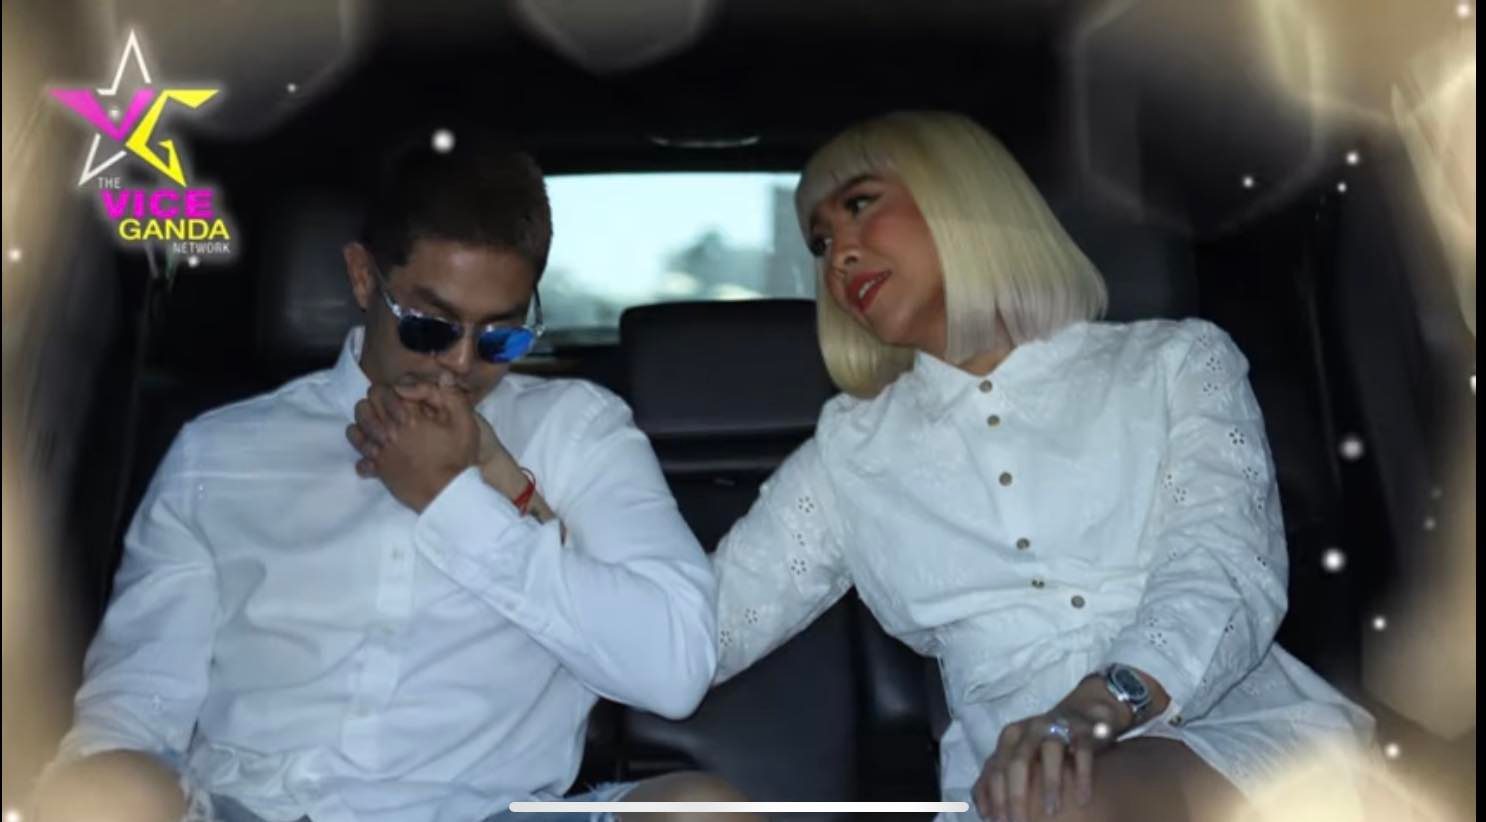 Vice Ganda and Ion Perez ‘tie the knot’ in Las Vegas